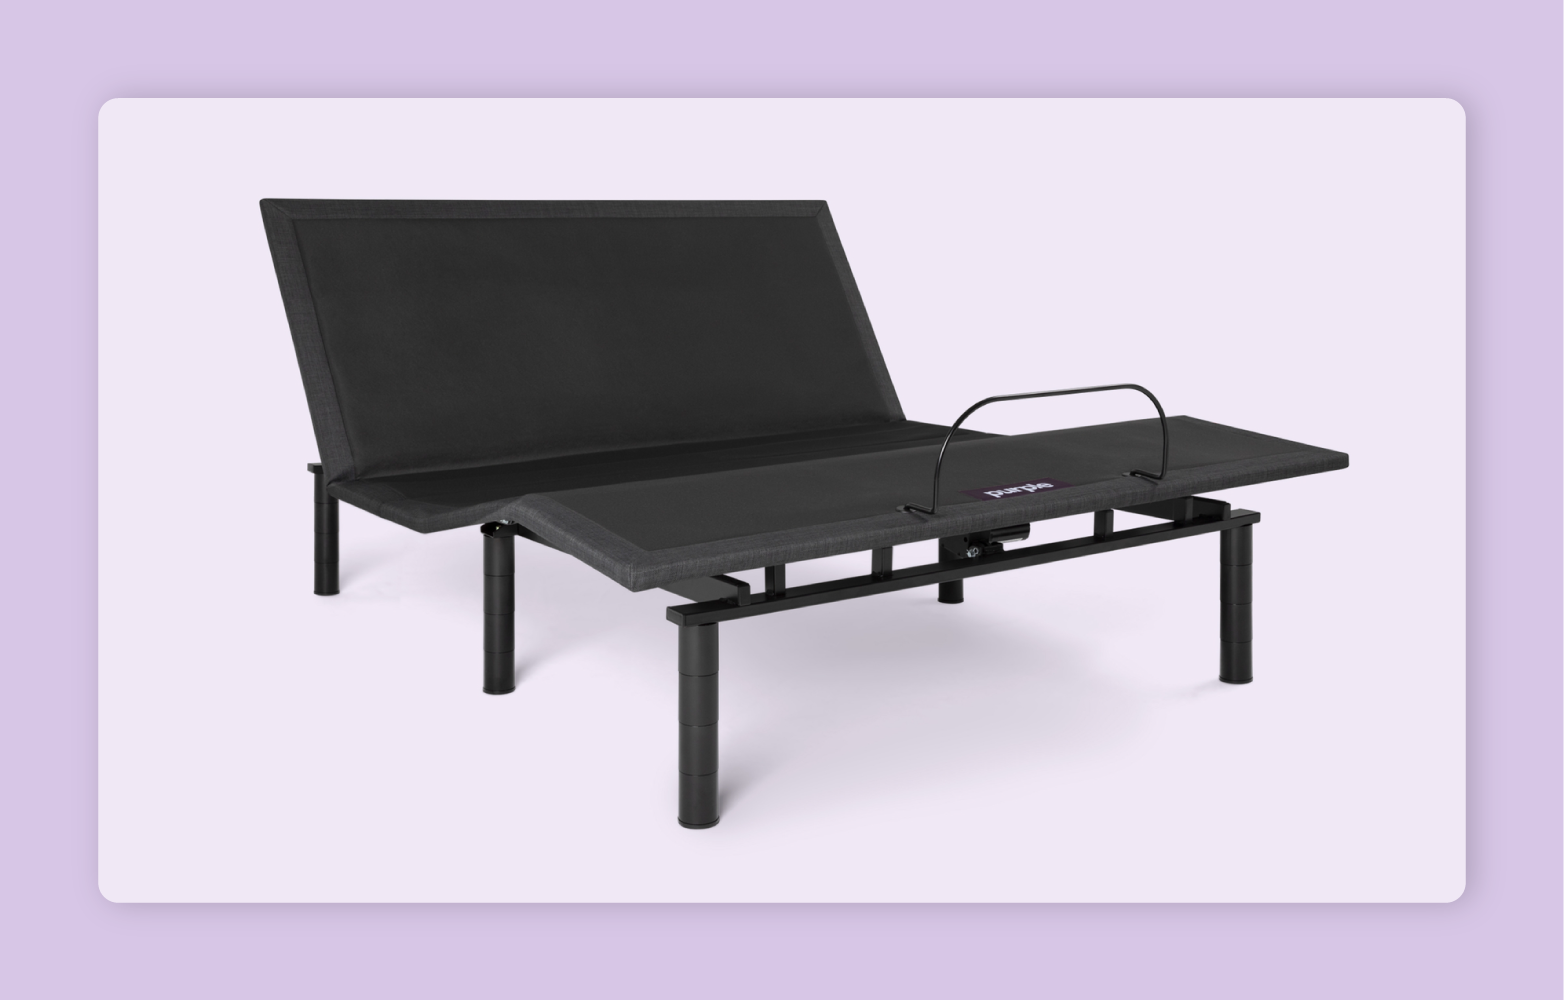 The charcoal gray Purple Premium Smart Base in an inclined position before a light purple background.